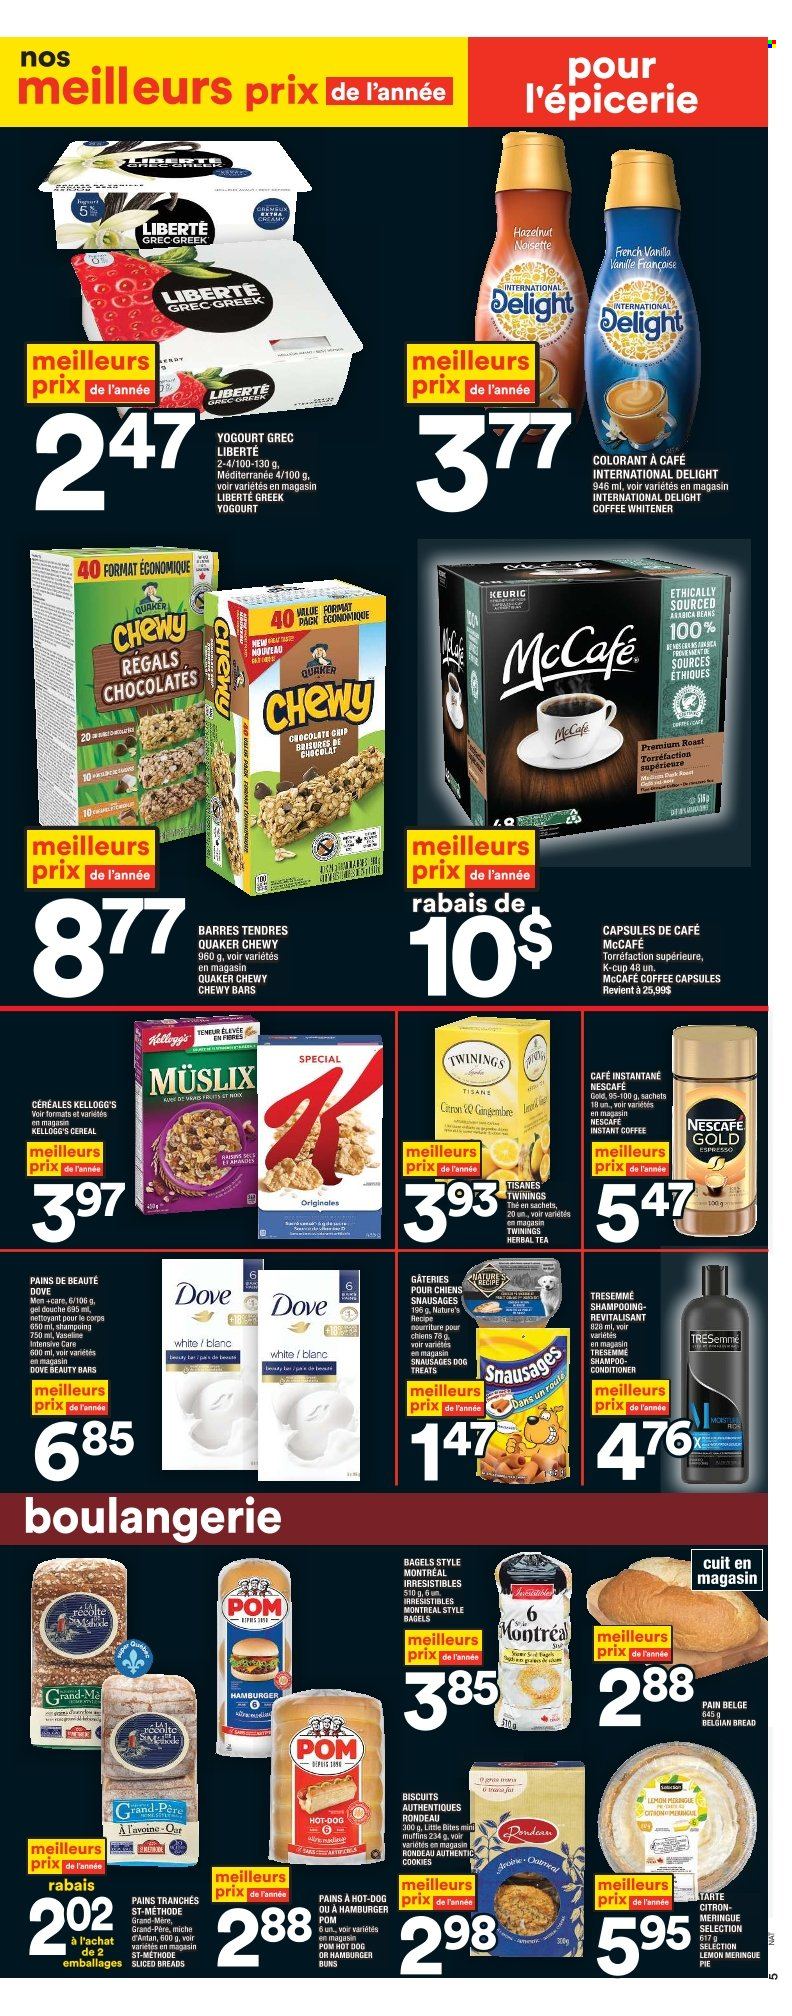 thumbnail - Super C Flyer - March 23, 2023 - March 29, 2023 - Sales products - bagels, bread, buns, burger buns, muffin, hot dog, Quaker, roast, coffee whitener, cookies, Dove, chocolate chips, Kellogg's, biscuit, Little Bites, oatmeal, cereals, dried fruit, tea, herbal tea, Twinings, instant coffee, arabica beans, coffee capsules, McCafe, K-Cups, Keurig, Vaseline, conditioner, TRESemmé, raisins, shampoo, Nescafé. Page 6.